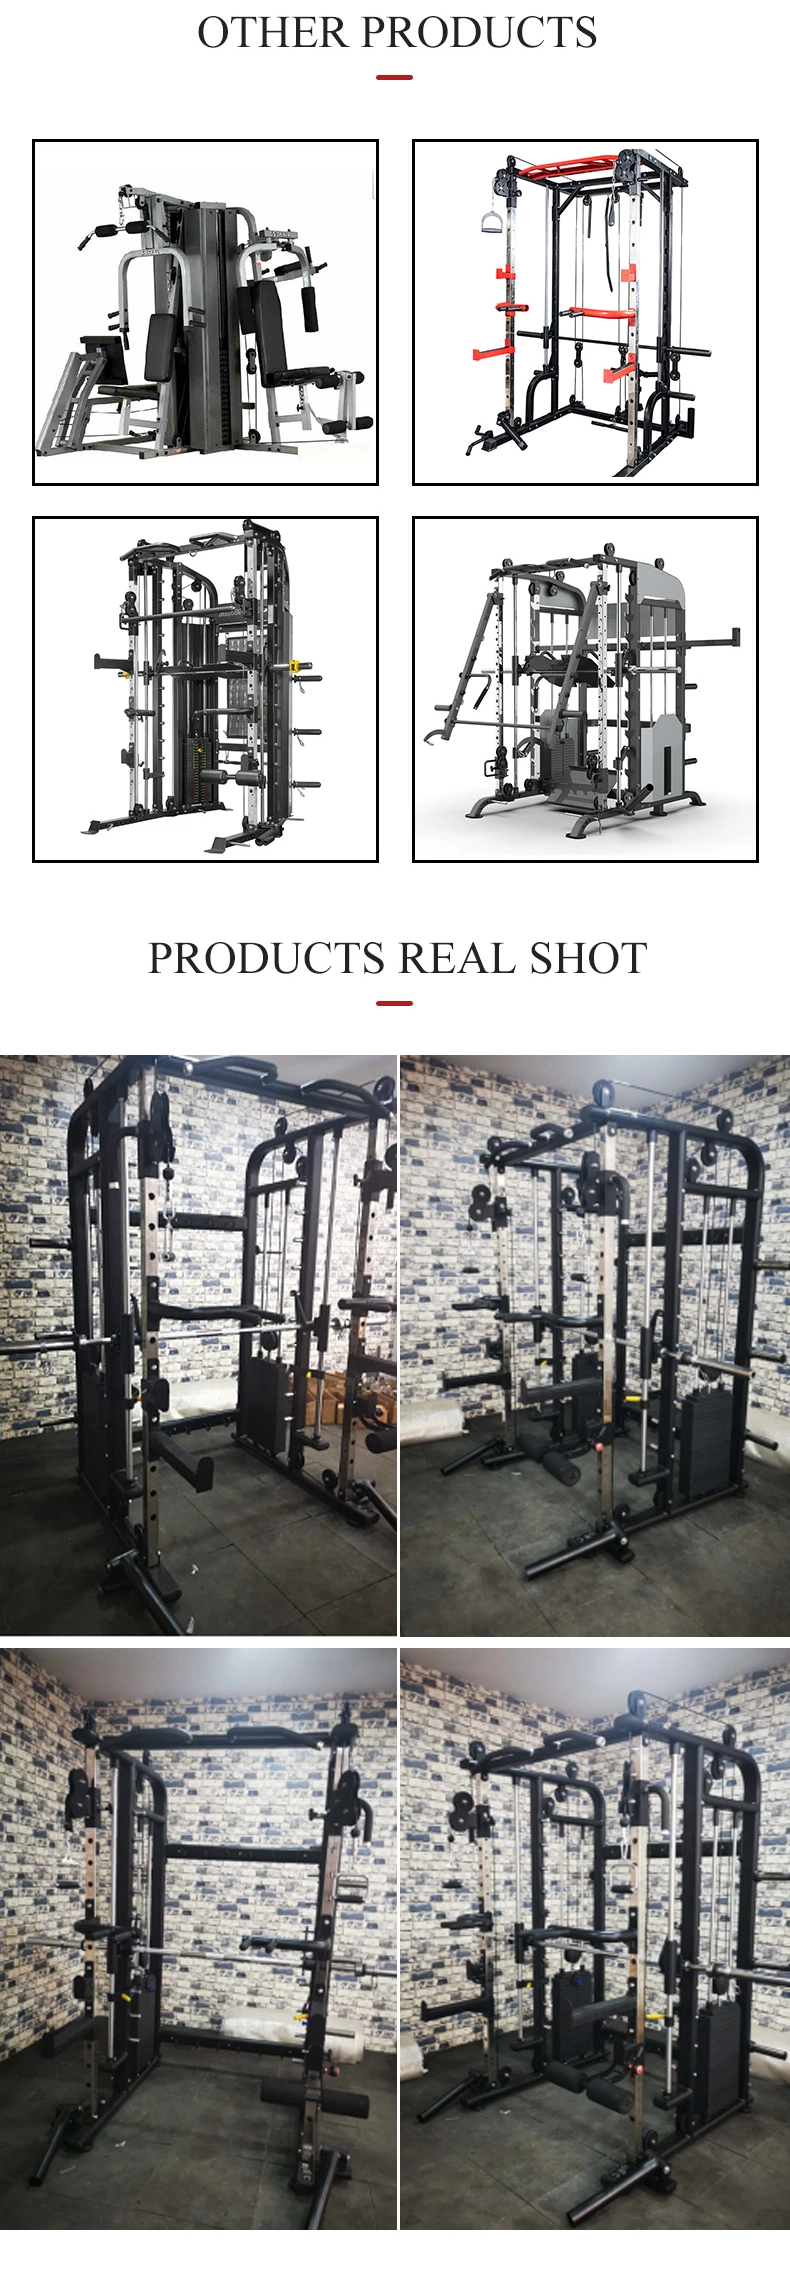 Best Quality Multi Station Multi Strength Fitness Home Gym Equipment